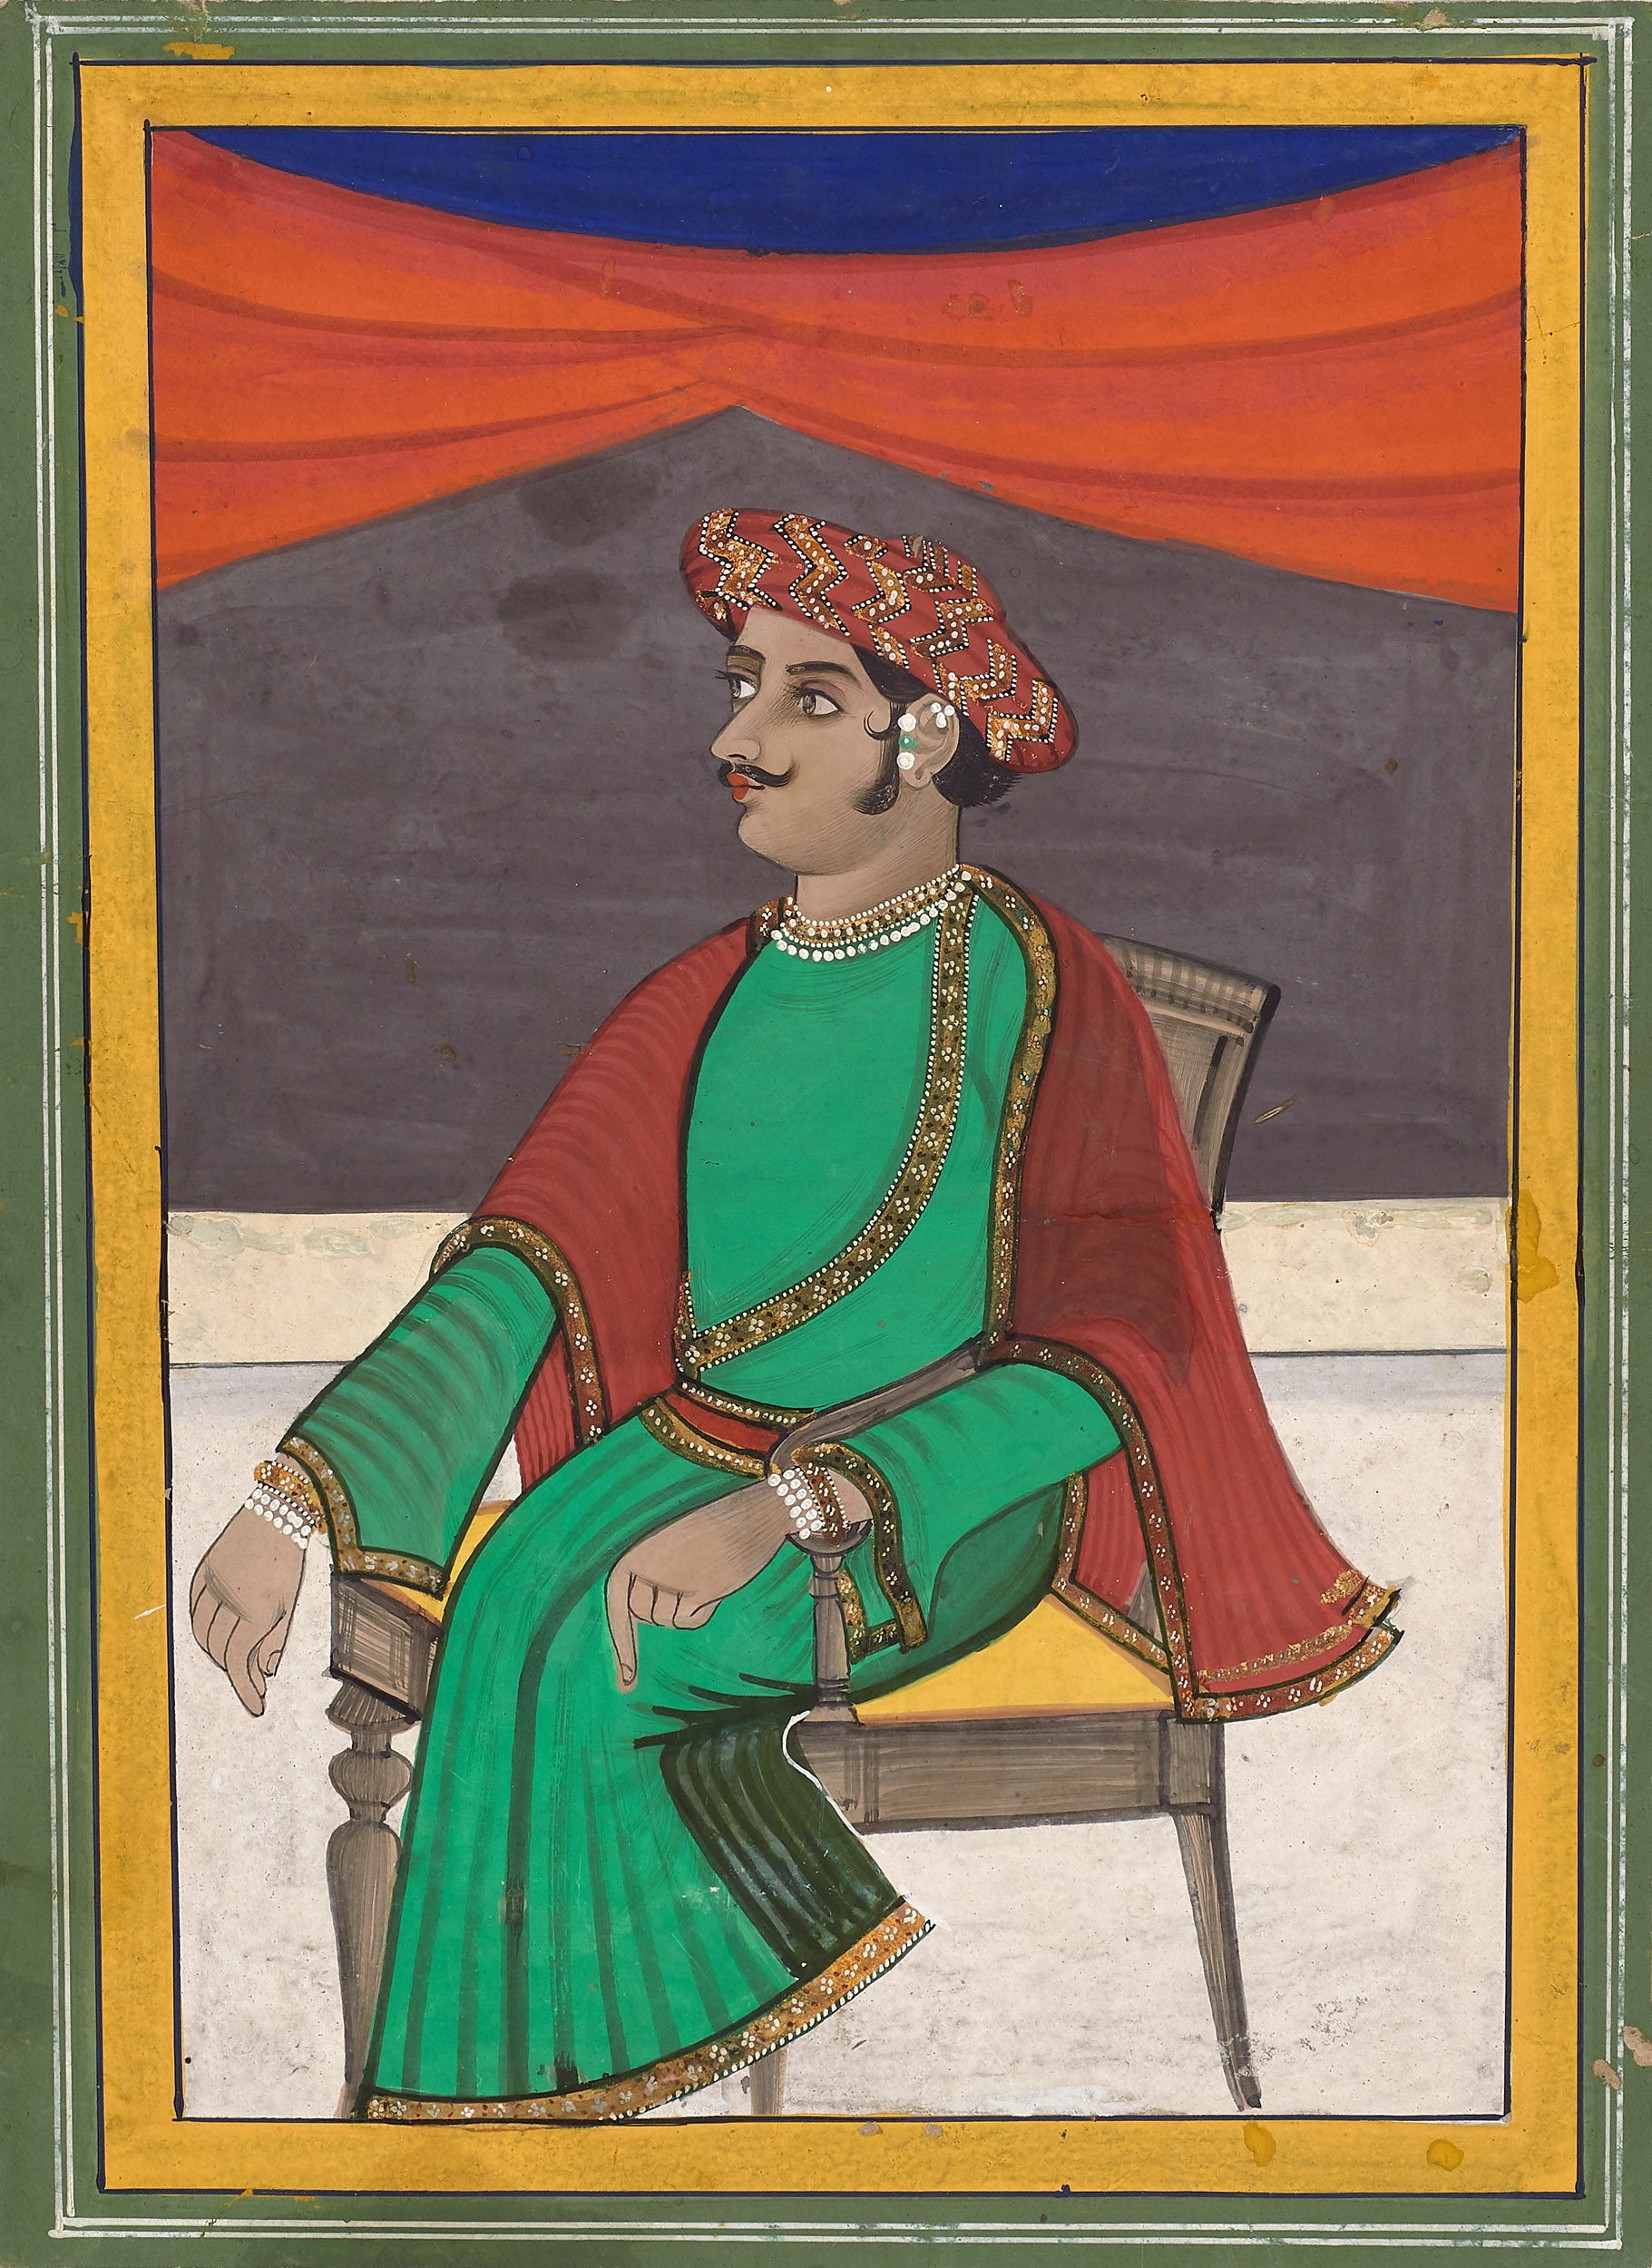 A Bengali Man Seated in a Chair